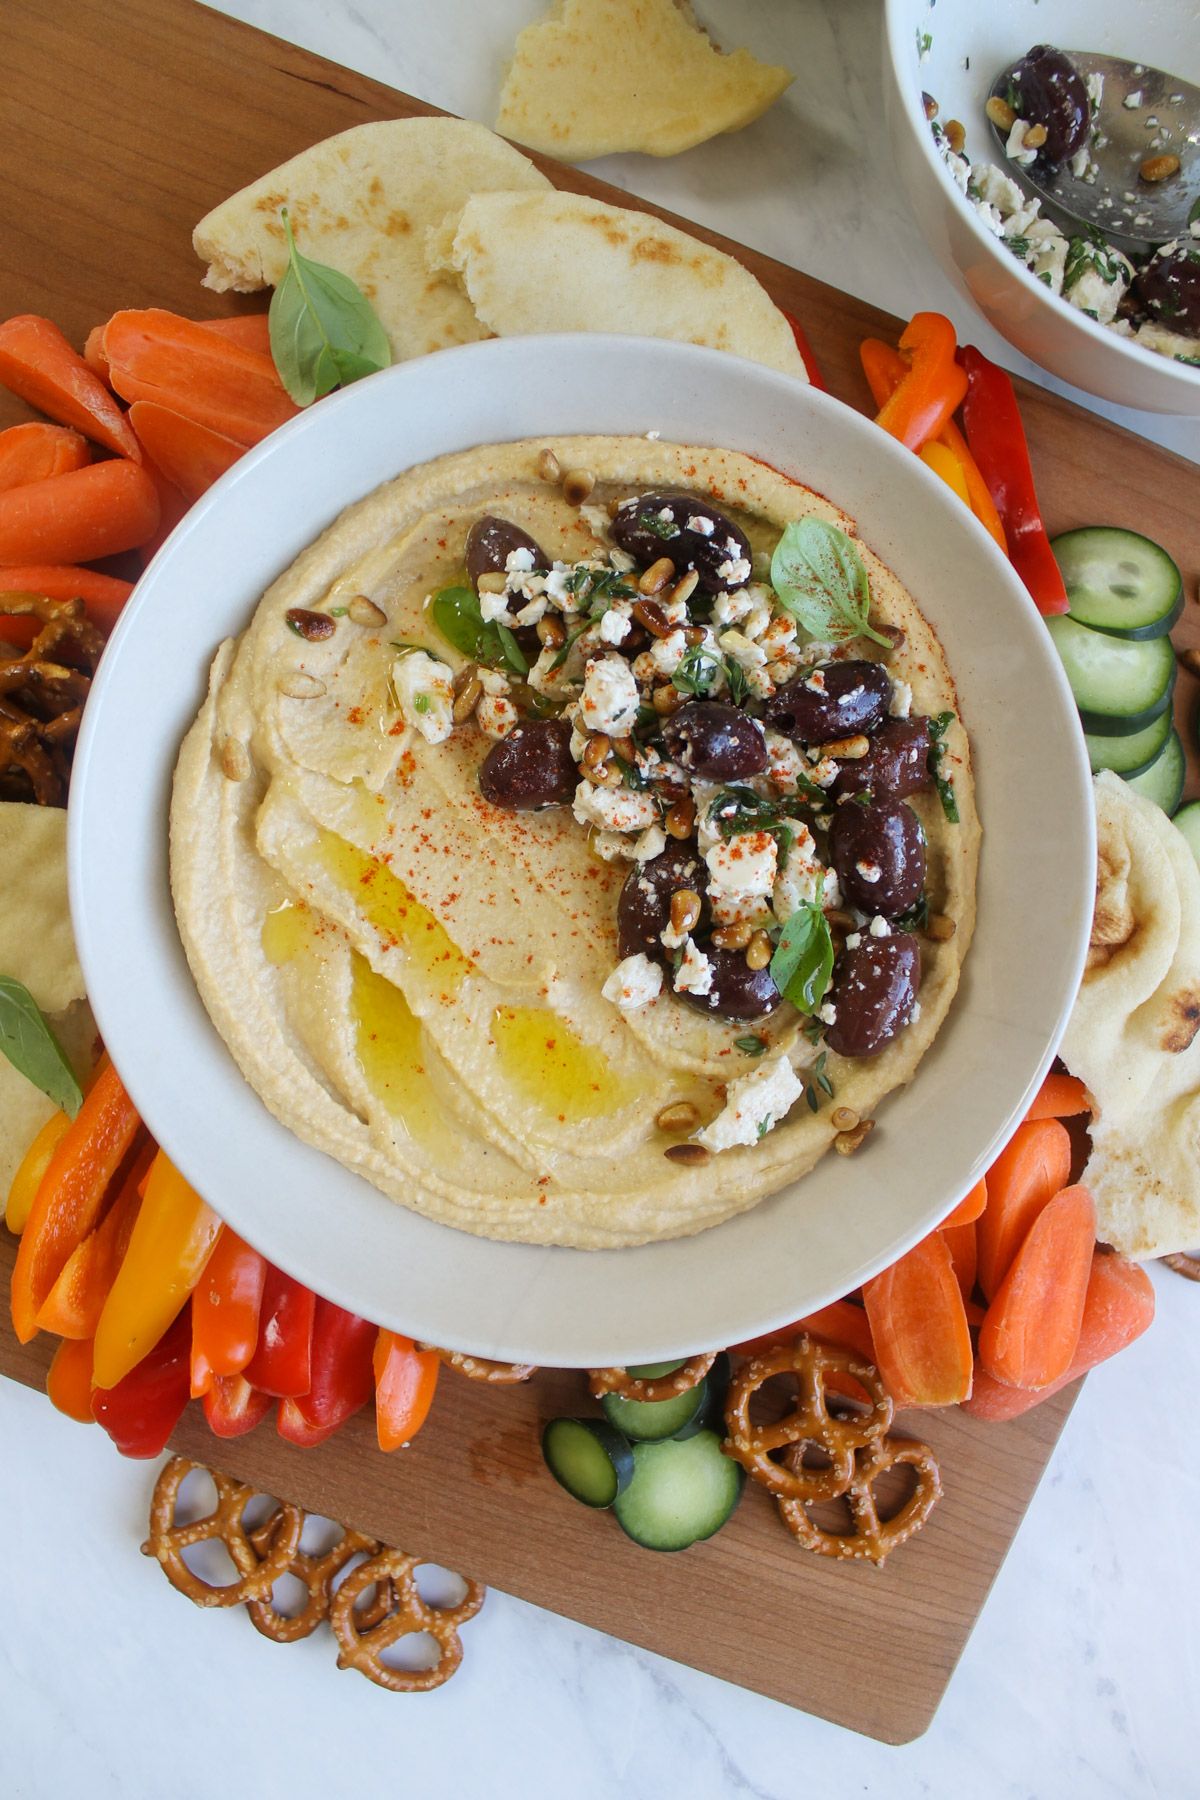 A board of veggies and pita surrounding hummus with feta and olives.